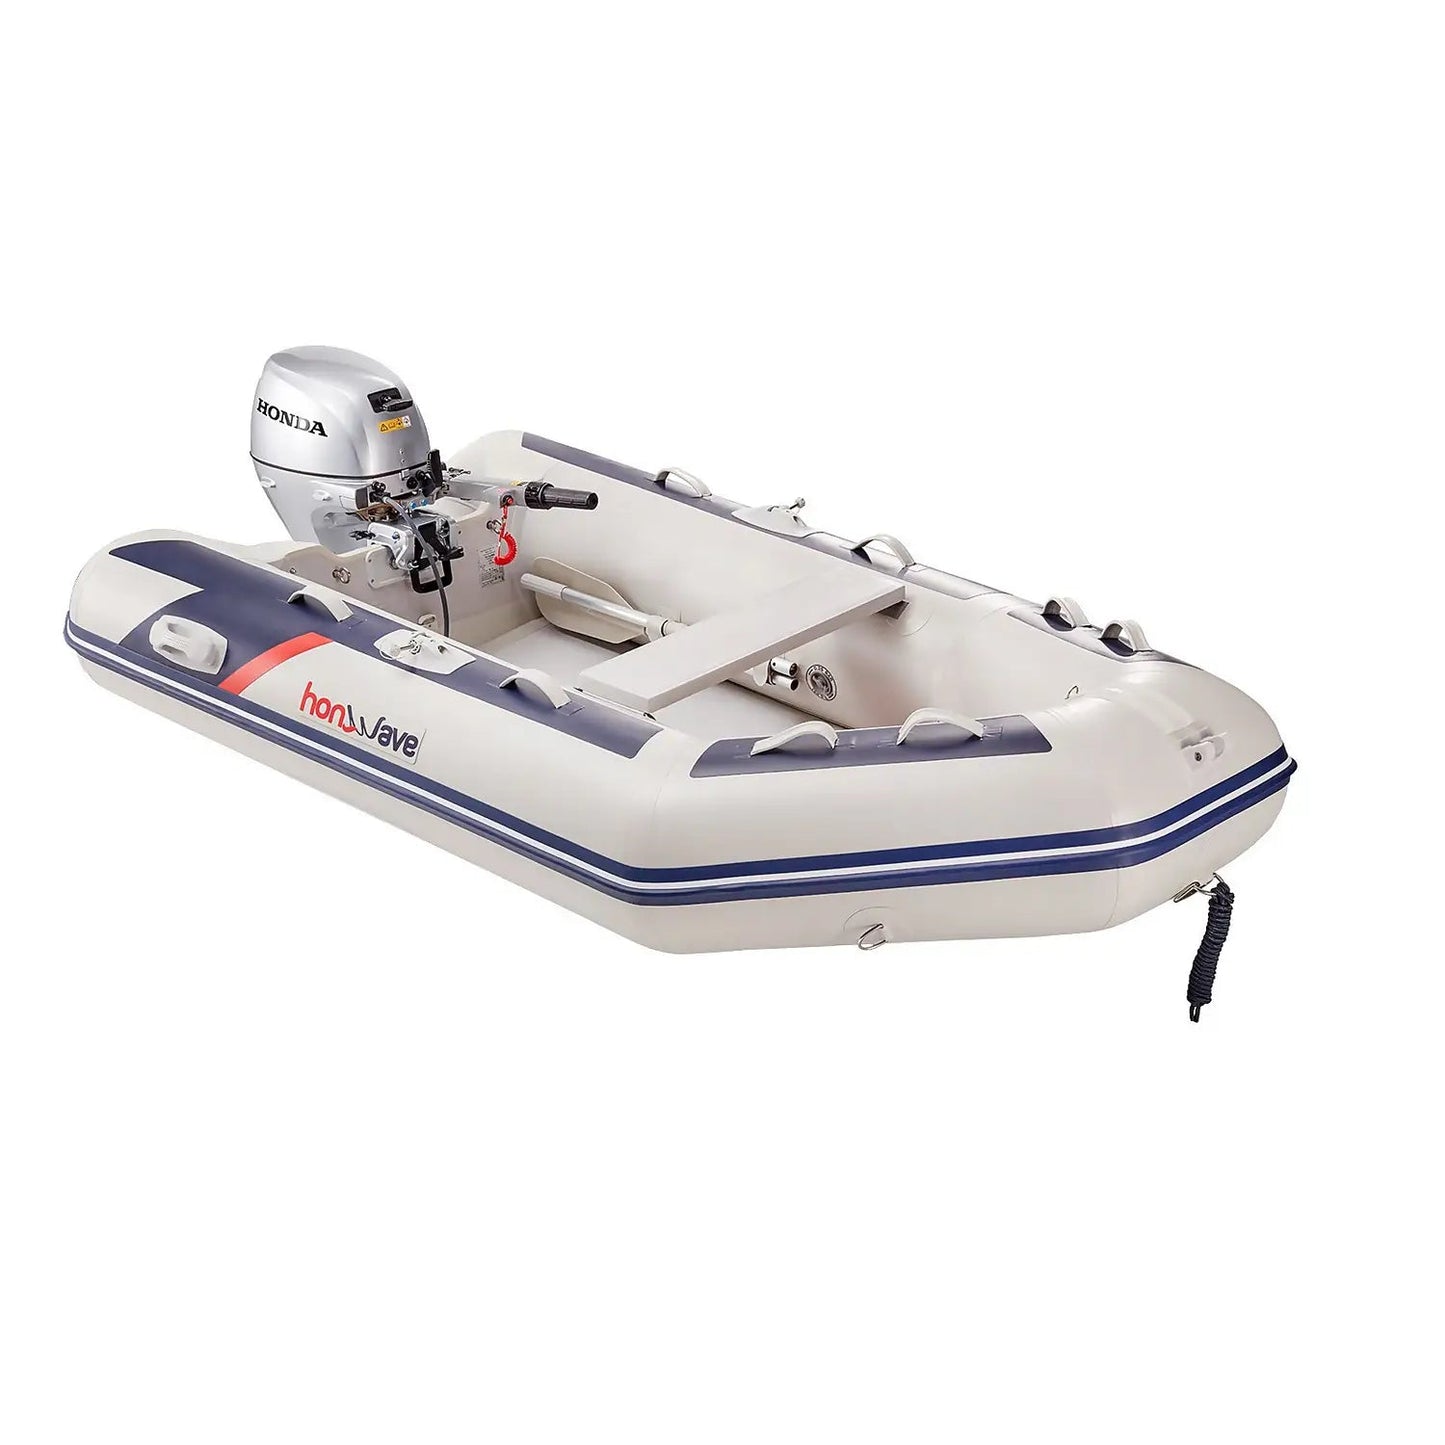 Honwave T24 2.4m Inflatable Dinghy Tender Boat with Air V-Floor